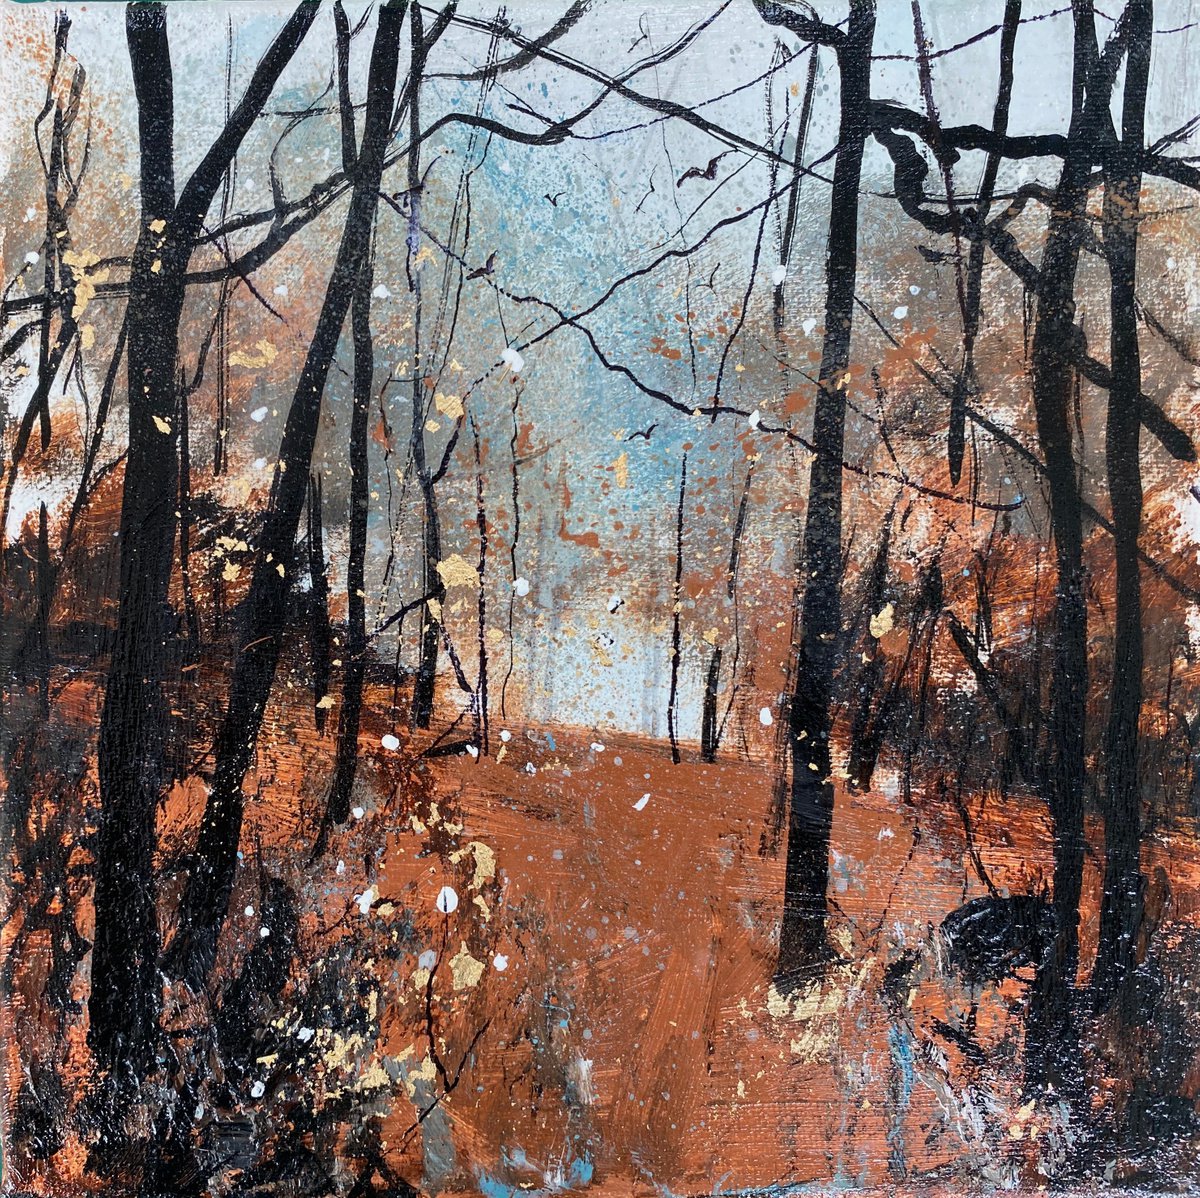 Seasons - Late Autumn, Cool Shades by Teresa Tanner